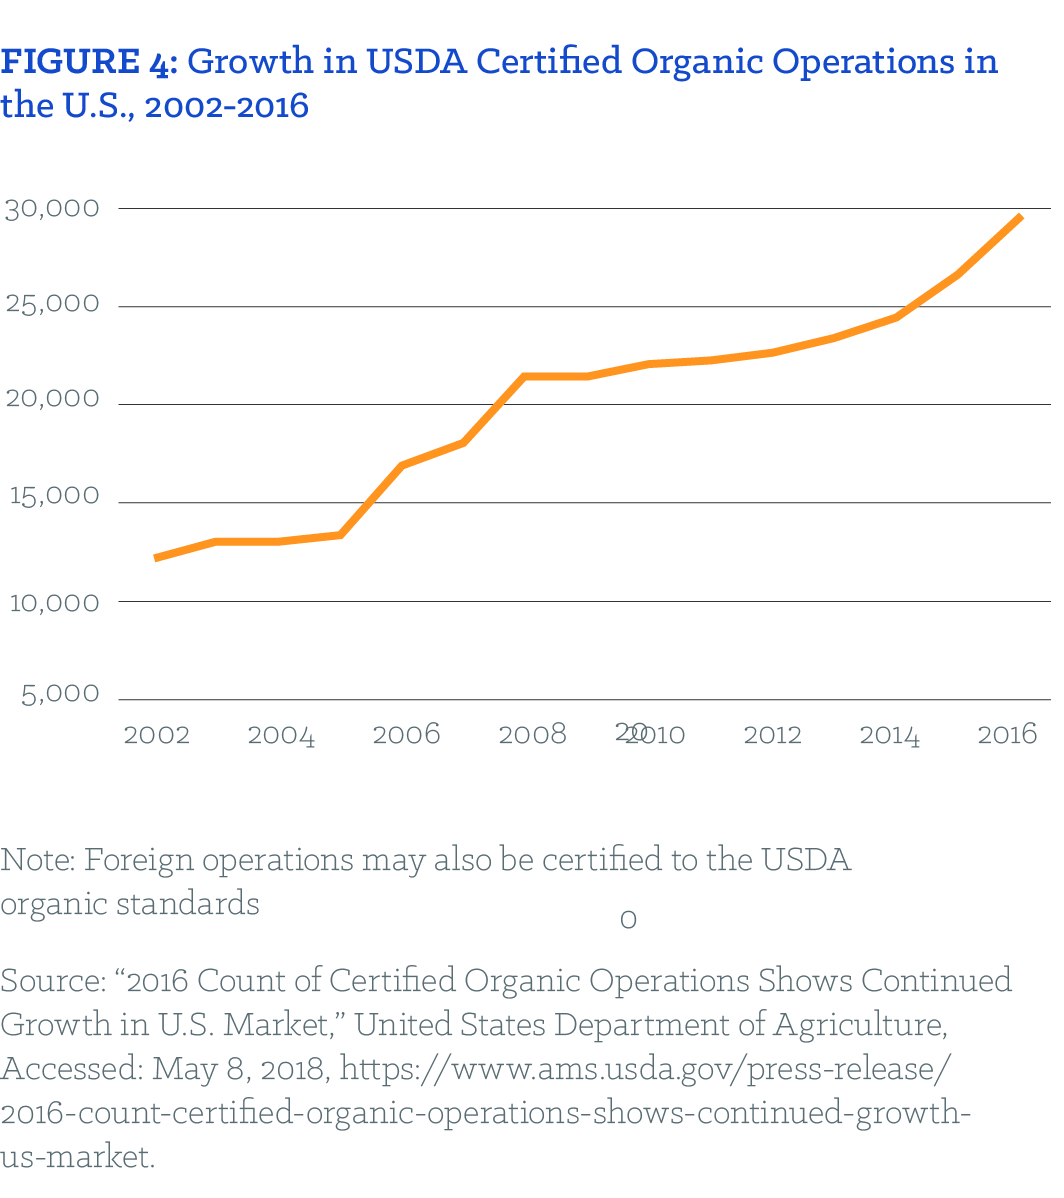 FIGURE 4: Growth in USDA Certified Organic Operations in the U.S., 2002-2016